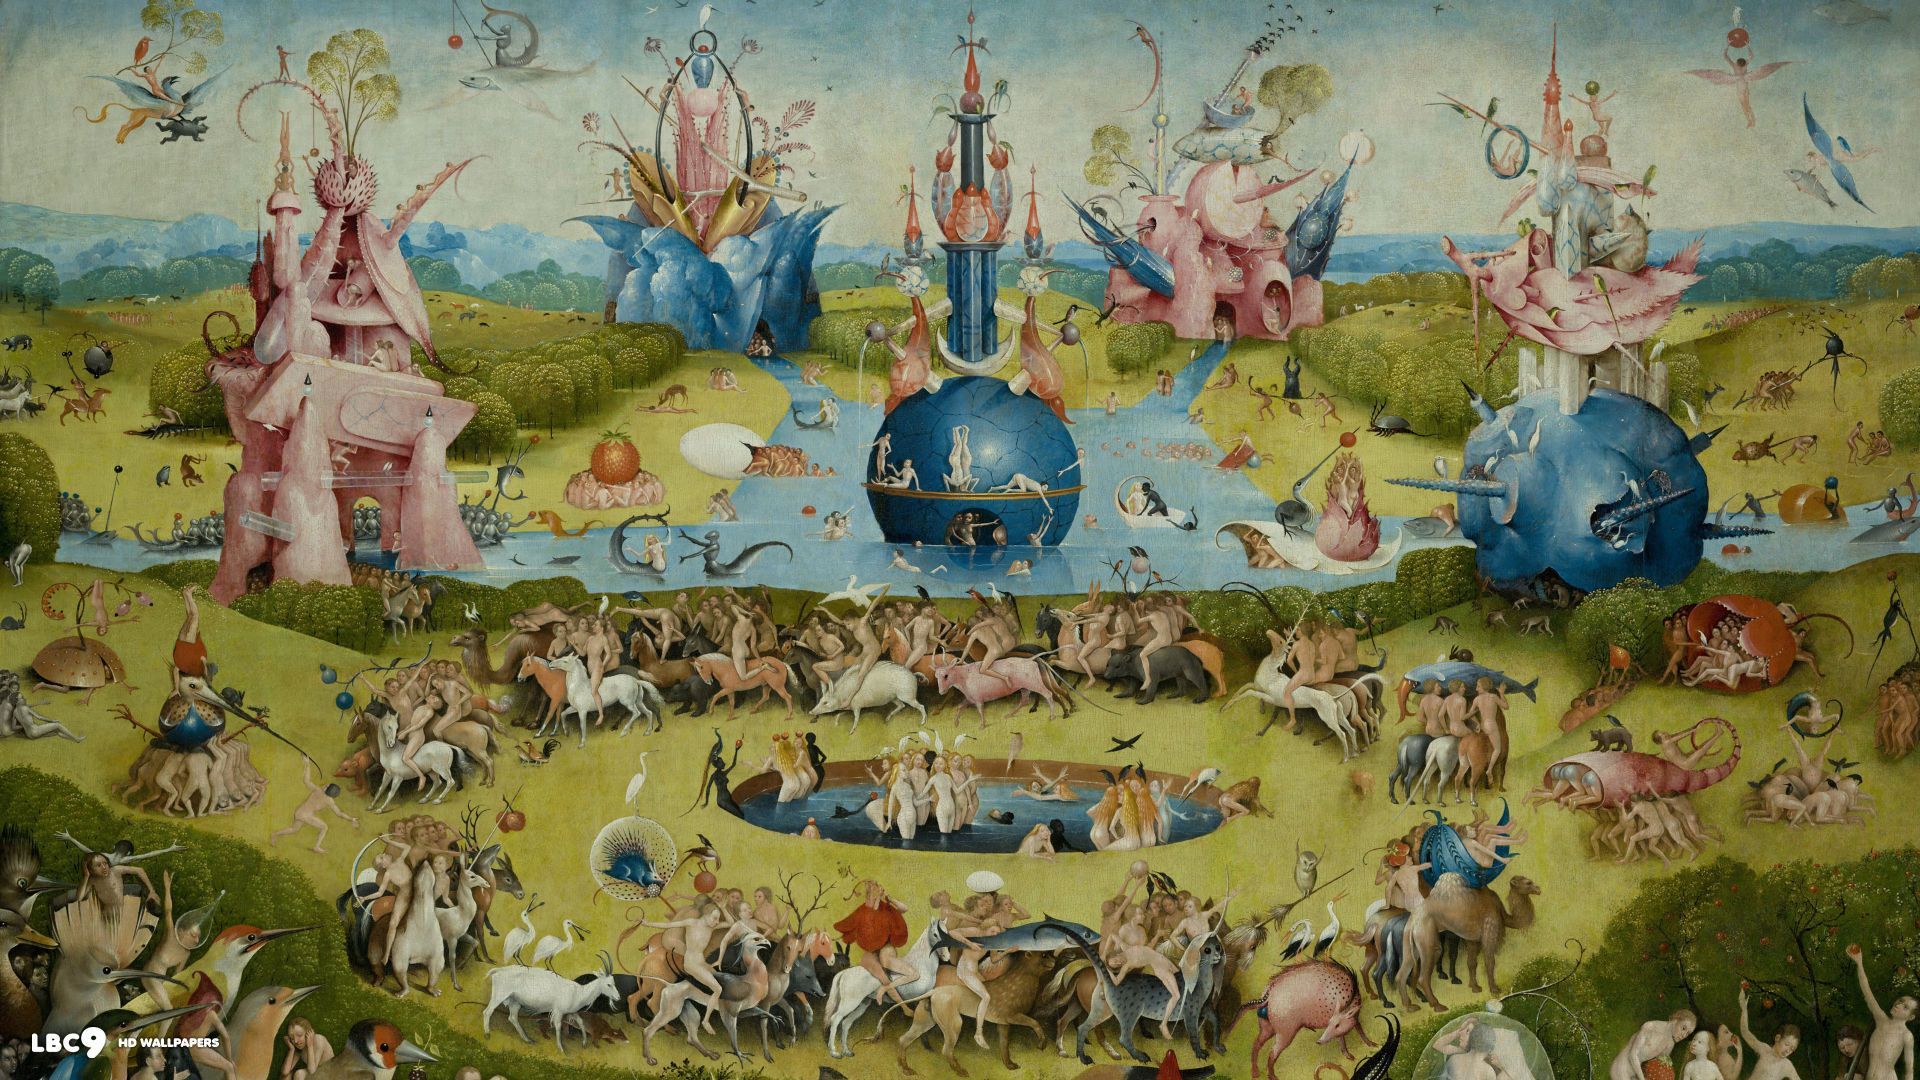 Garden Of Earthly Delights Center Detail Painting 920×080 Pixels. Hieronymus Bosch, Garden Of Earthly Delights, Art